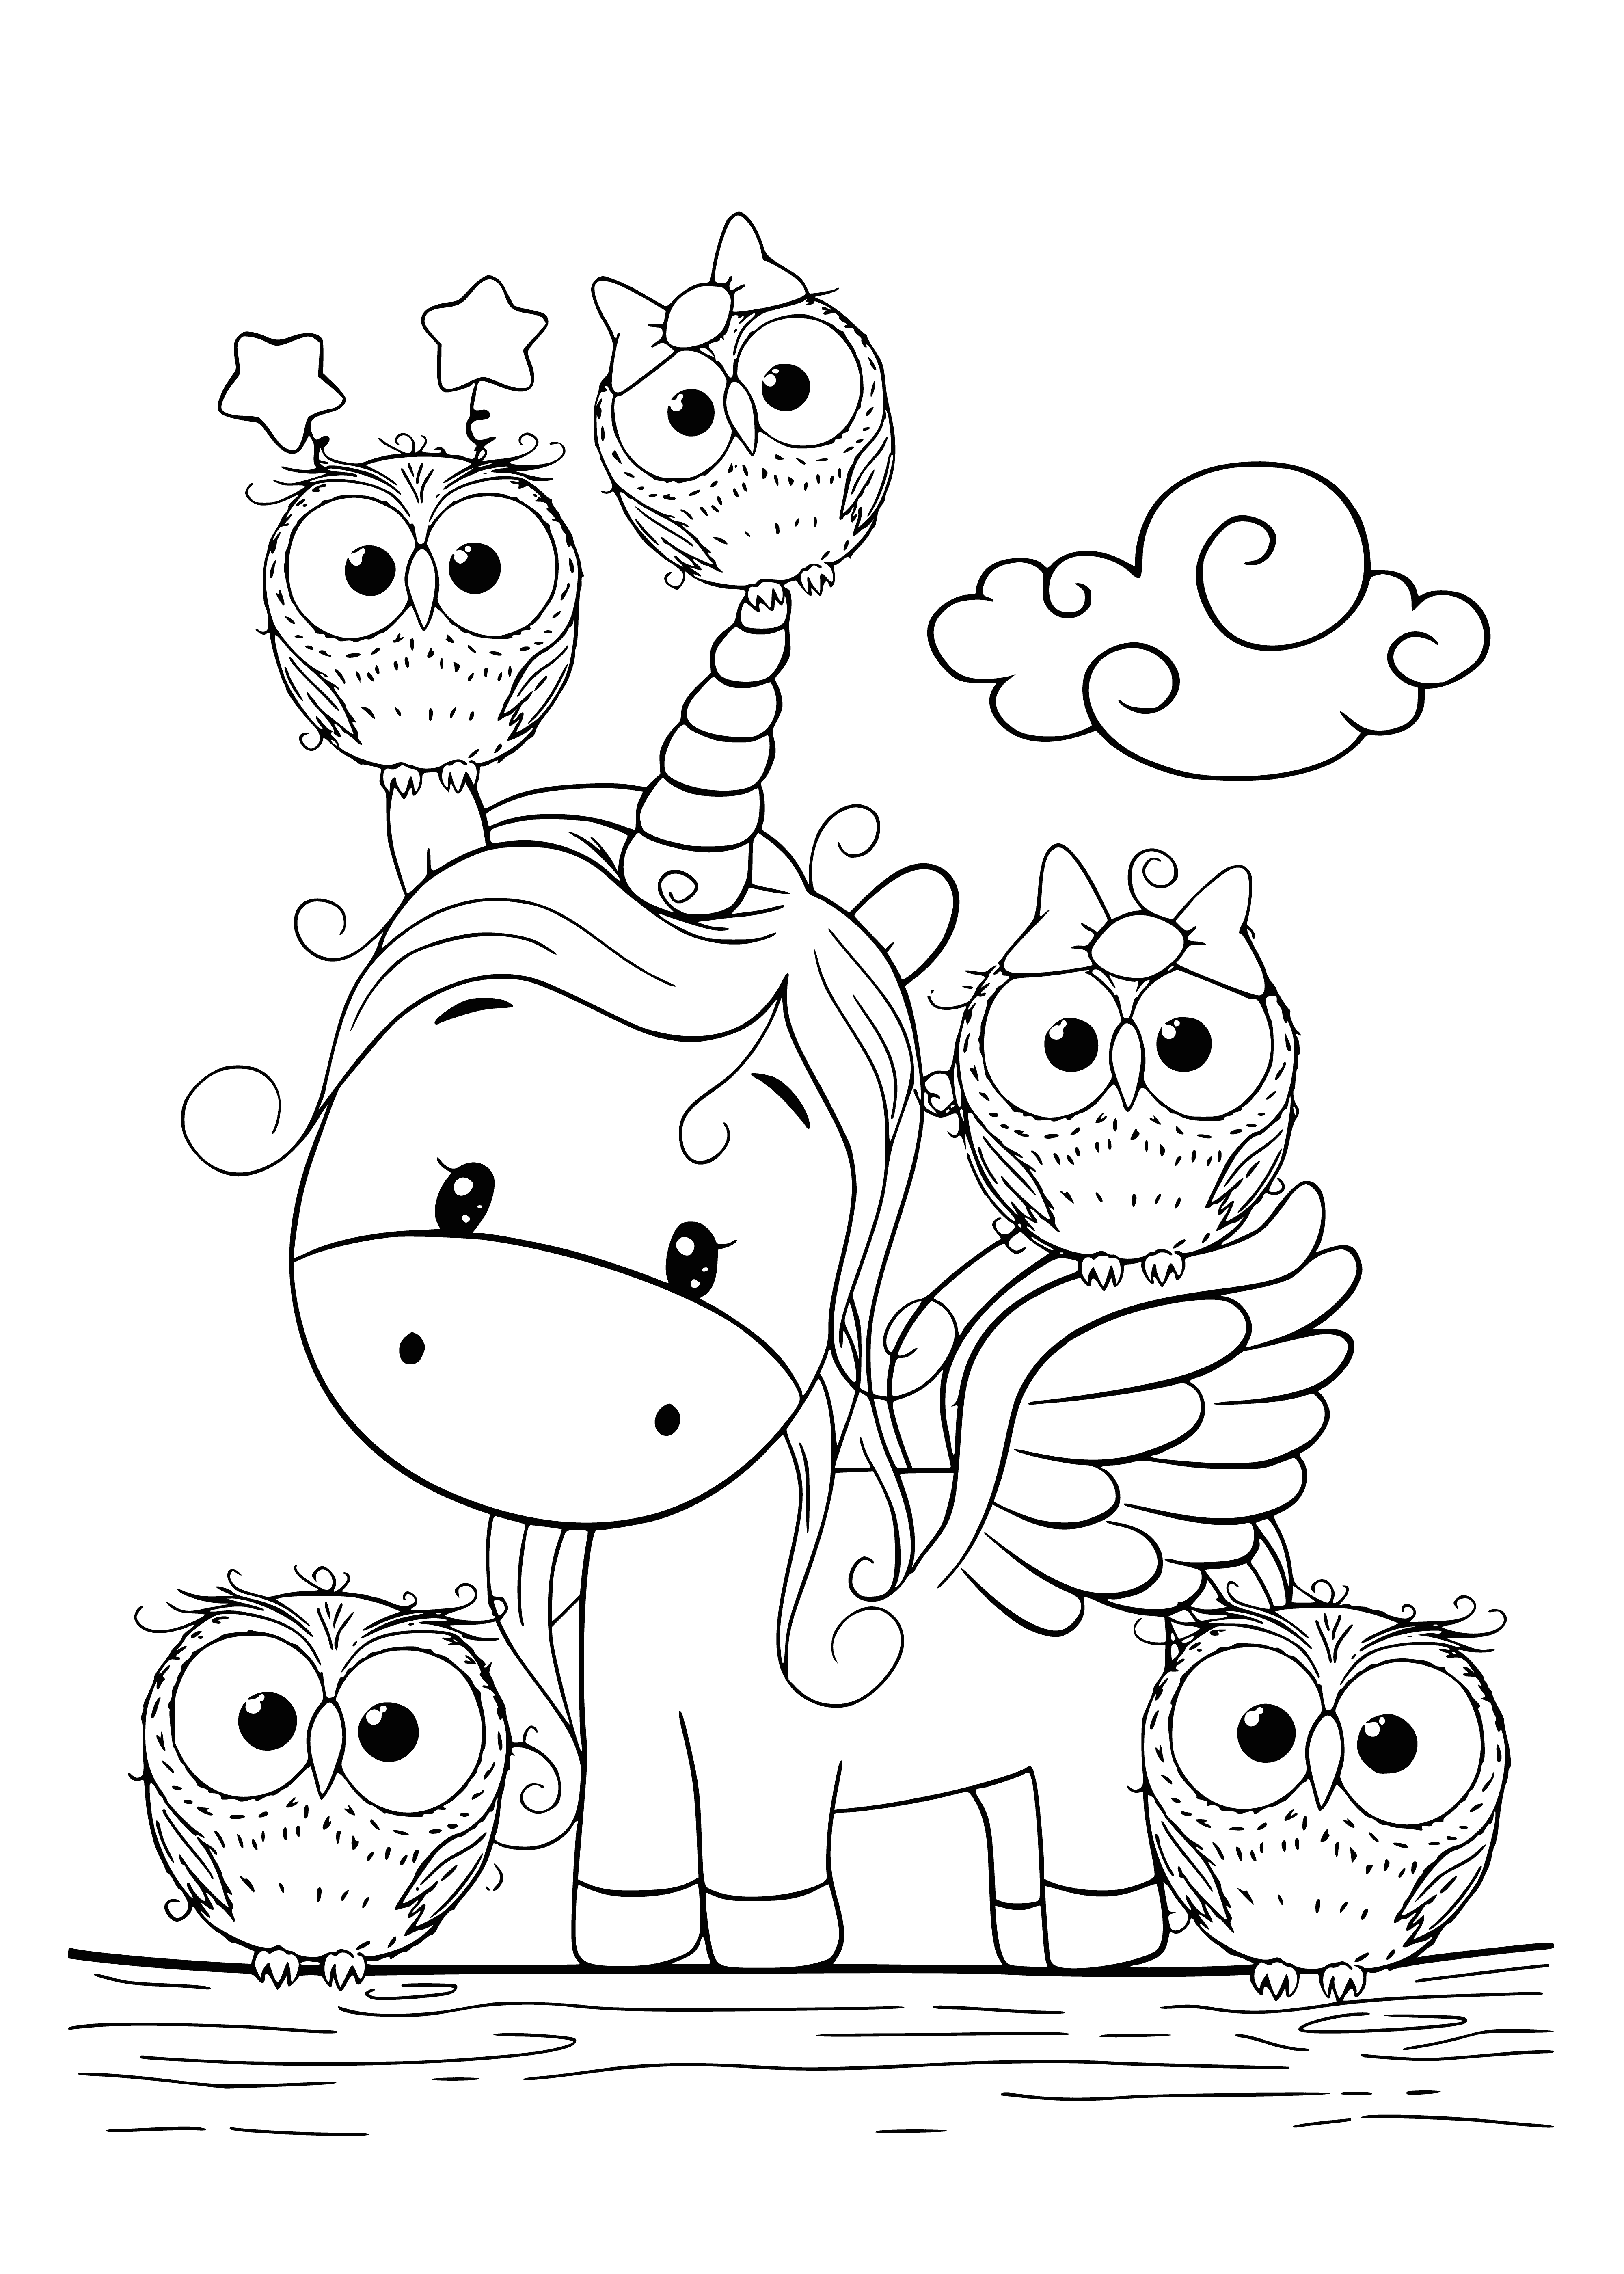 Unicorn and owlets coloring page